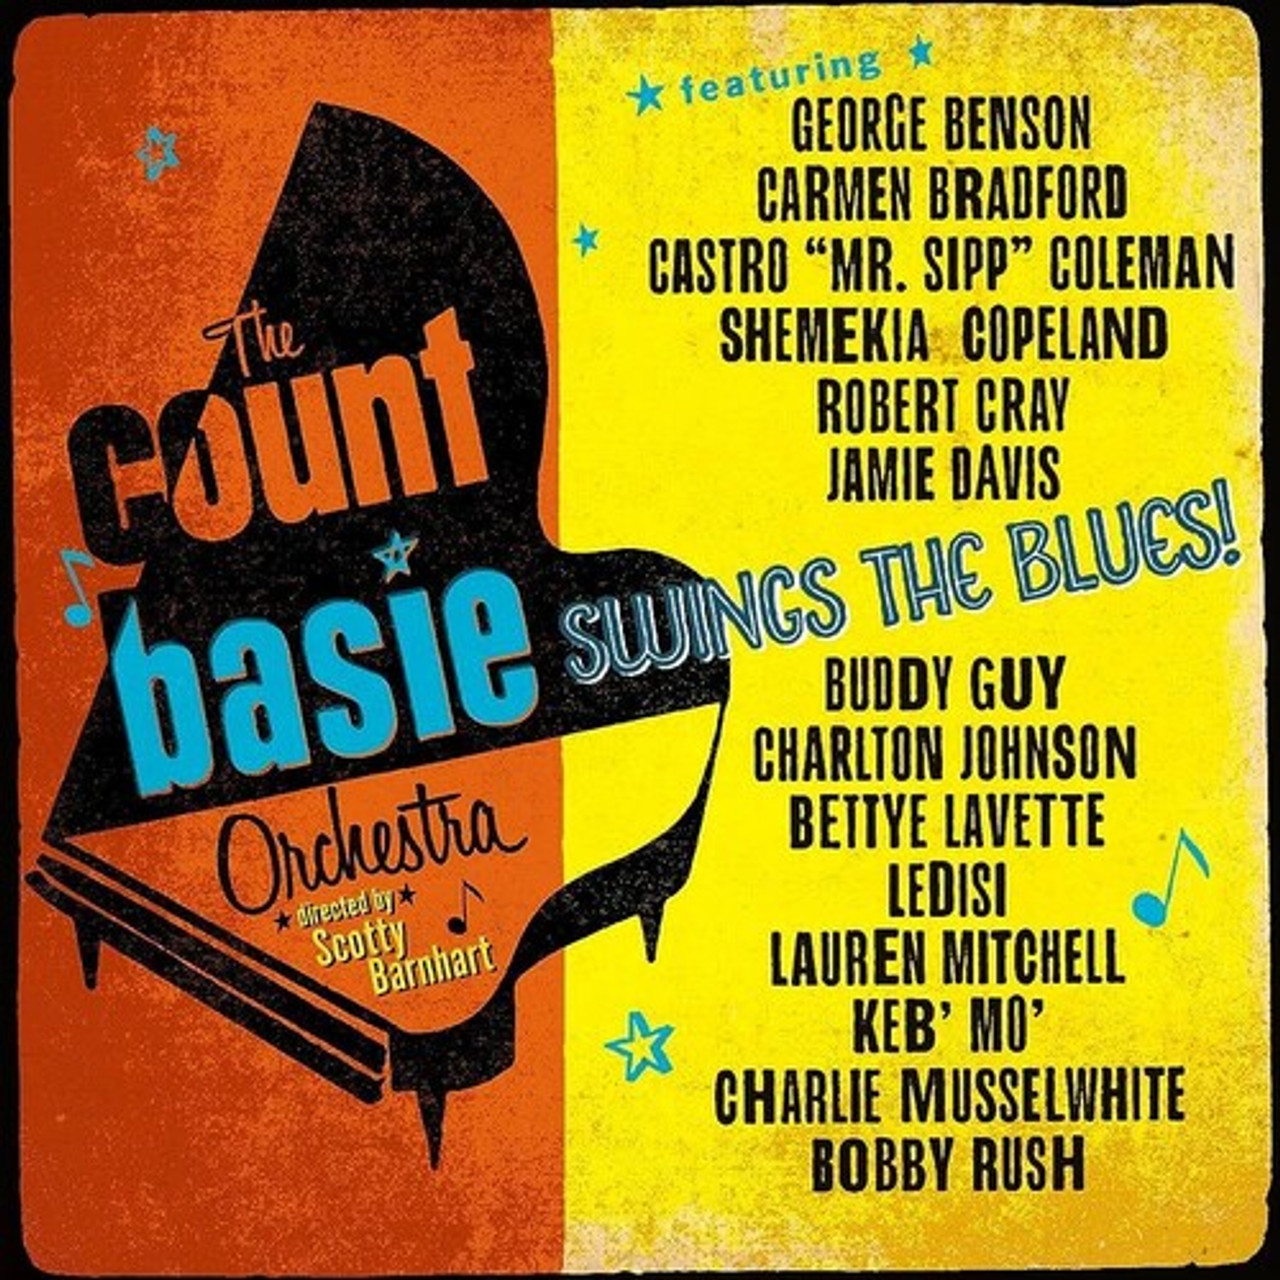 BASIE SWINGS THE BLUES - COUNT BASIE ORCHESTRA WITH SPECIAL GUESTS